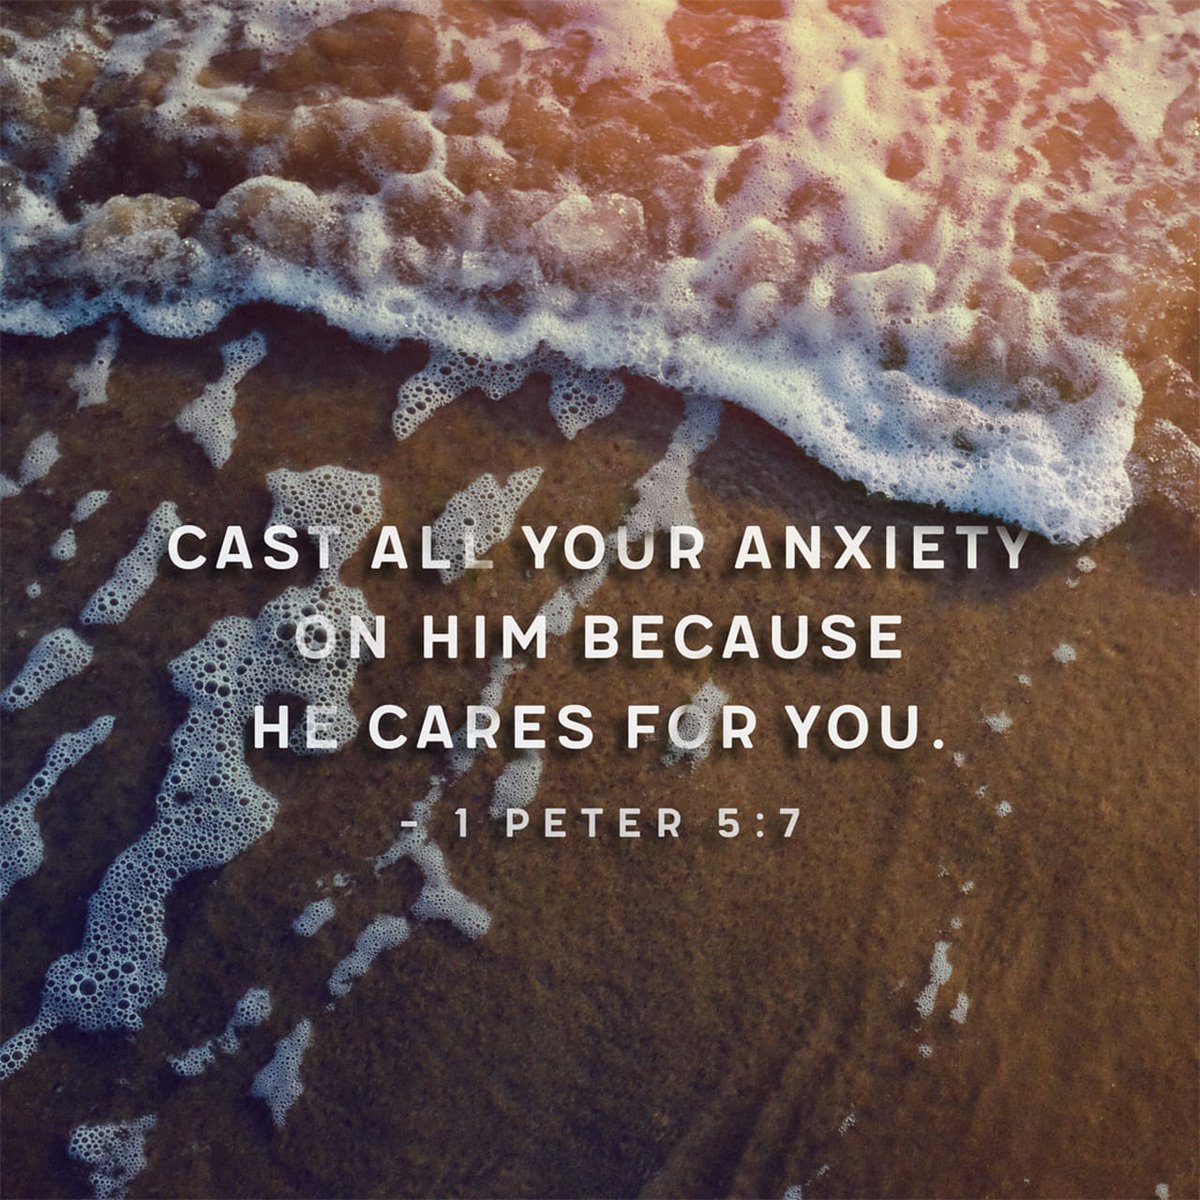 1 Peter 5:7 NASB
Casting all your anxiety on Him, because He cares for you. 

#dailybread #dailyverse #scripture #bibleverse #bible #jesus #anxiety #peace #princeofpeace #jesuschrist #kingofkings #lordoflords